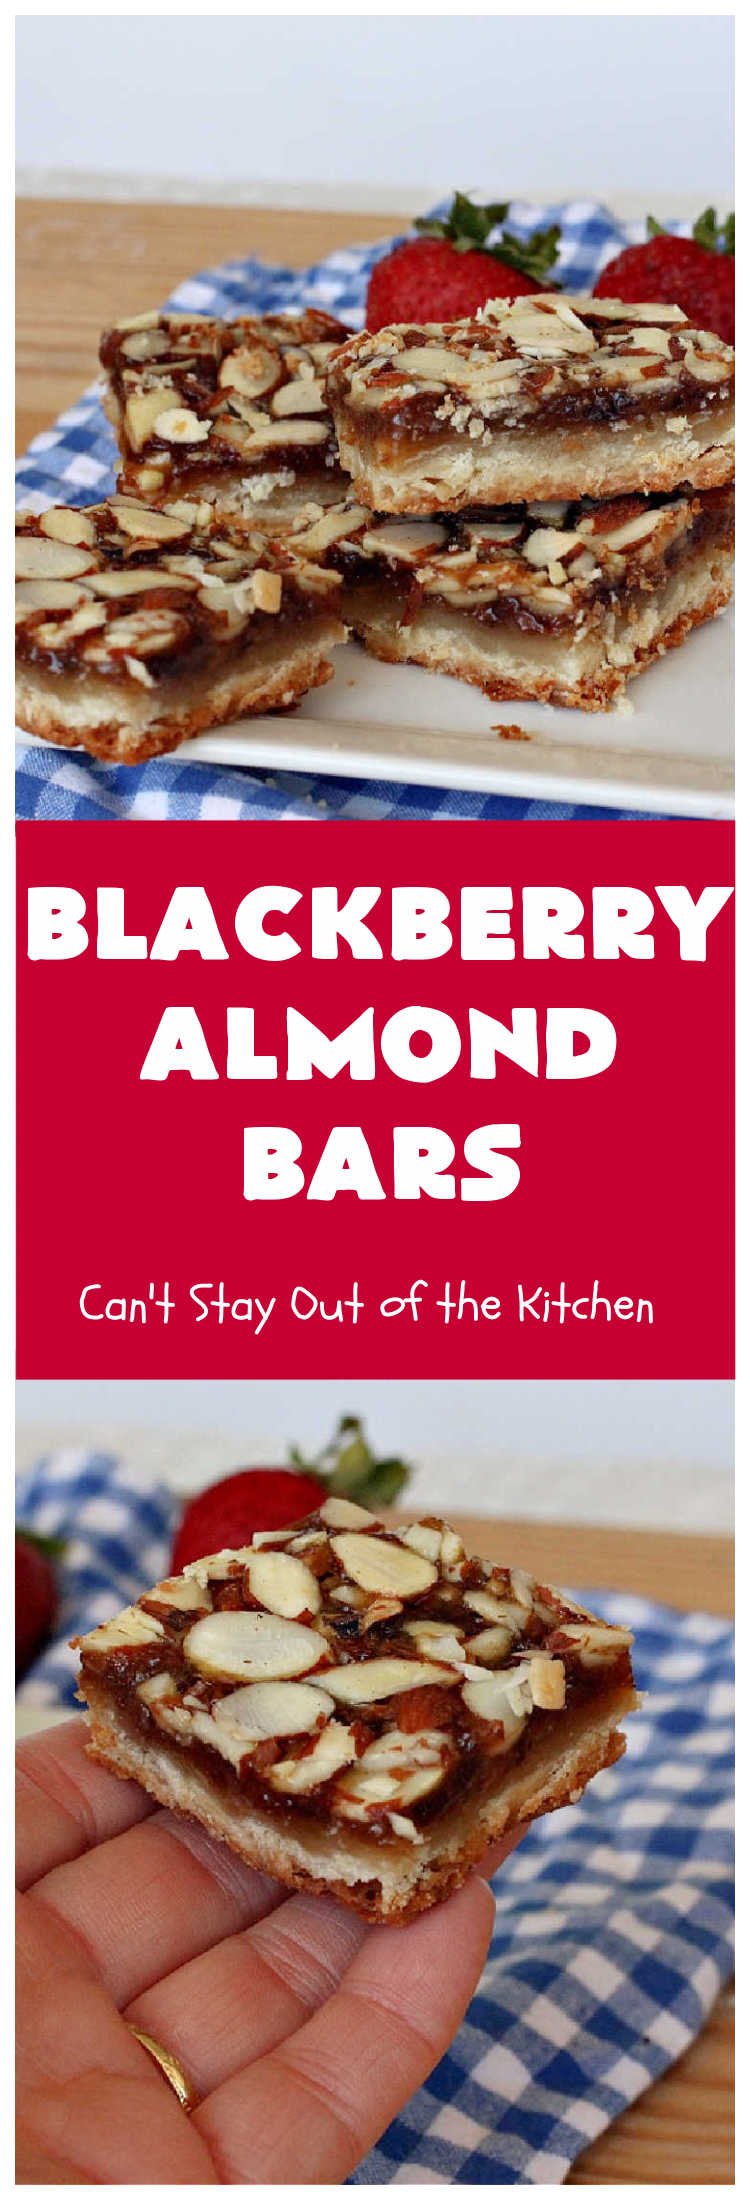 Blackberry Almond Bars | Can't Stay Out of the Kitchen | Your family will rave over these ooey, gooey delicious #dessert bars. The shortbread crust is topped with #blackberry filling and sliced #almonds. They're absolutely divine! Delightful for #tailgating parties, potlucks, backyard BBQs & #holiday baking. # #BlackberryDessert #BlackberryAlmondBars